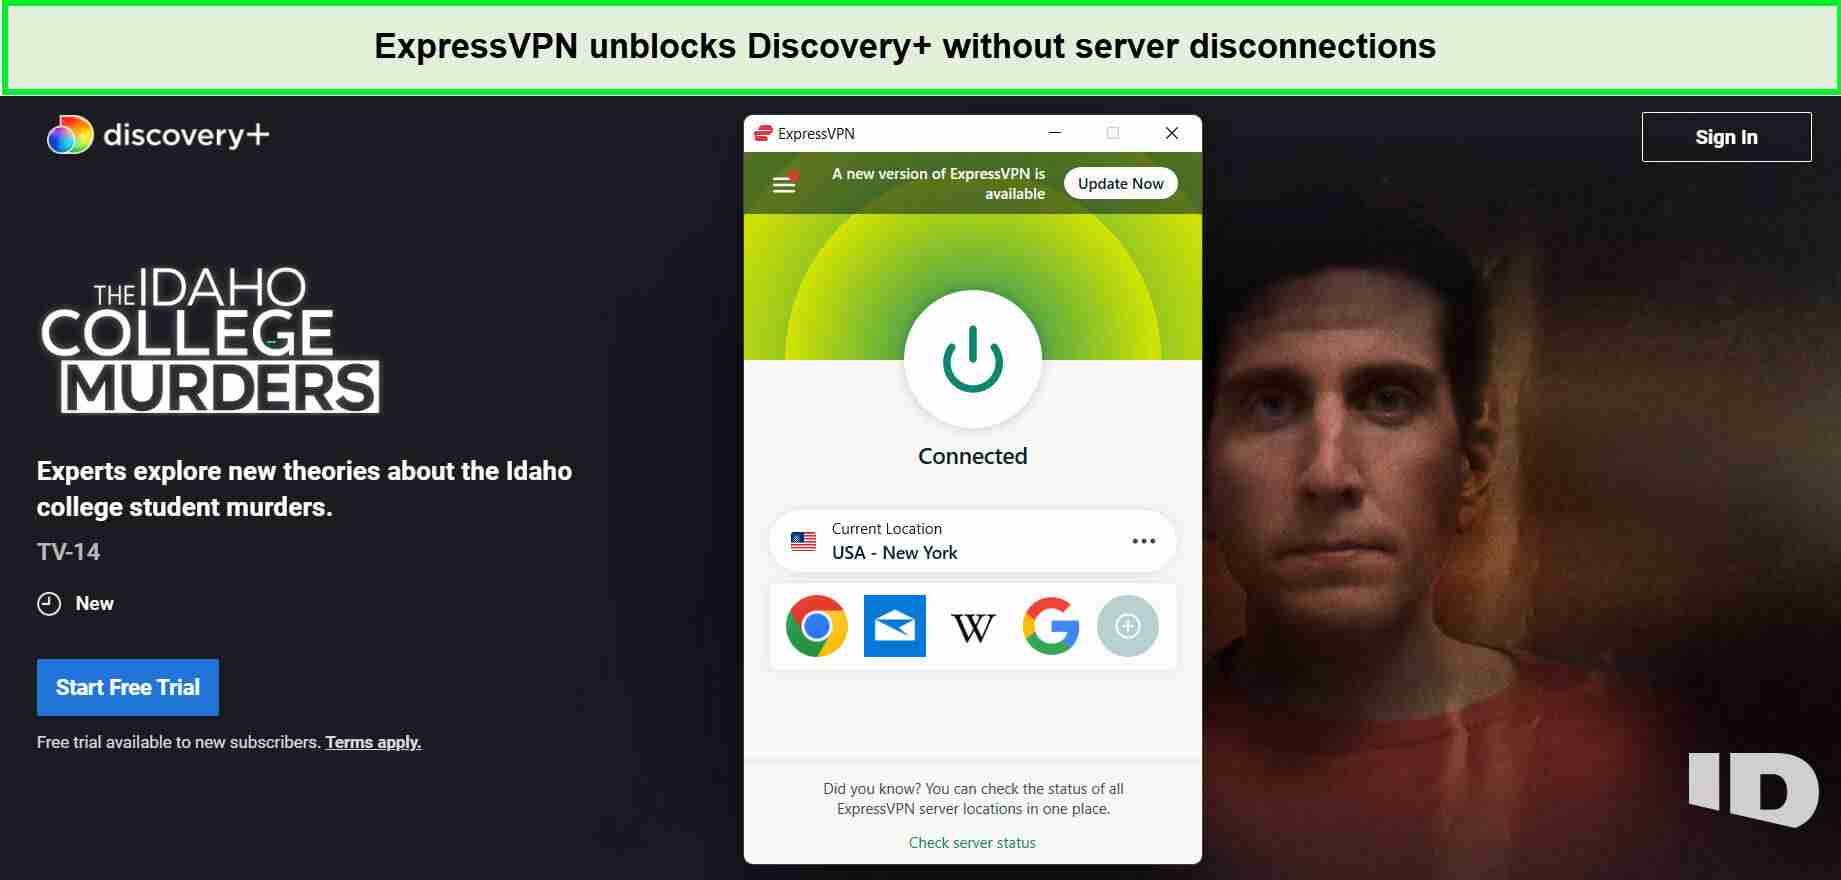 expressvpn-discovery-plus-best-combo-to-unblock-outside-usa